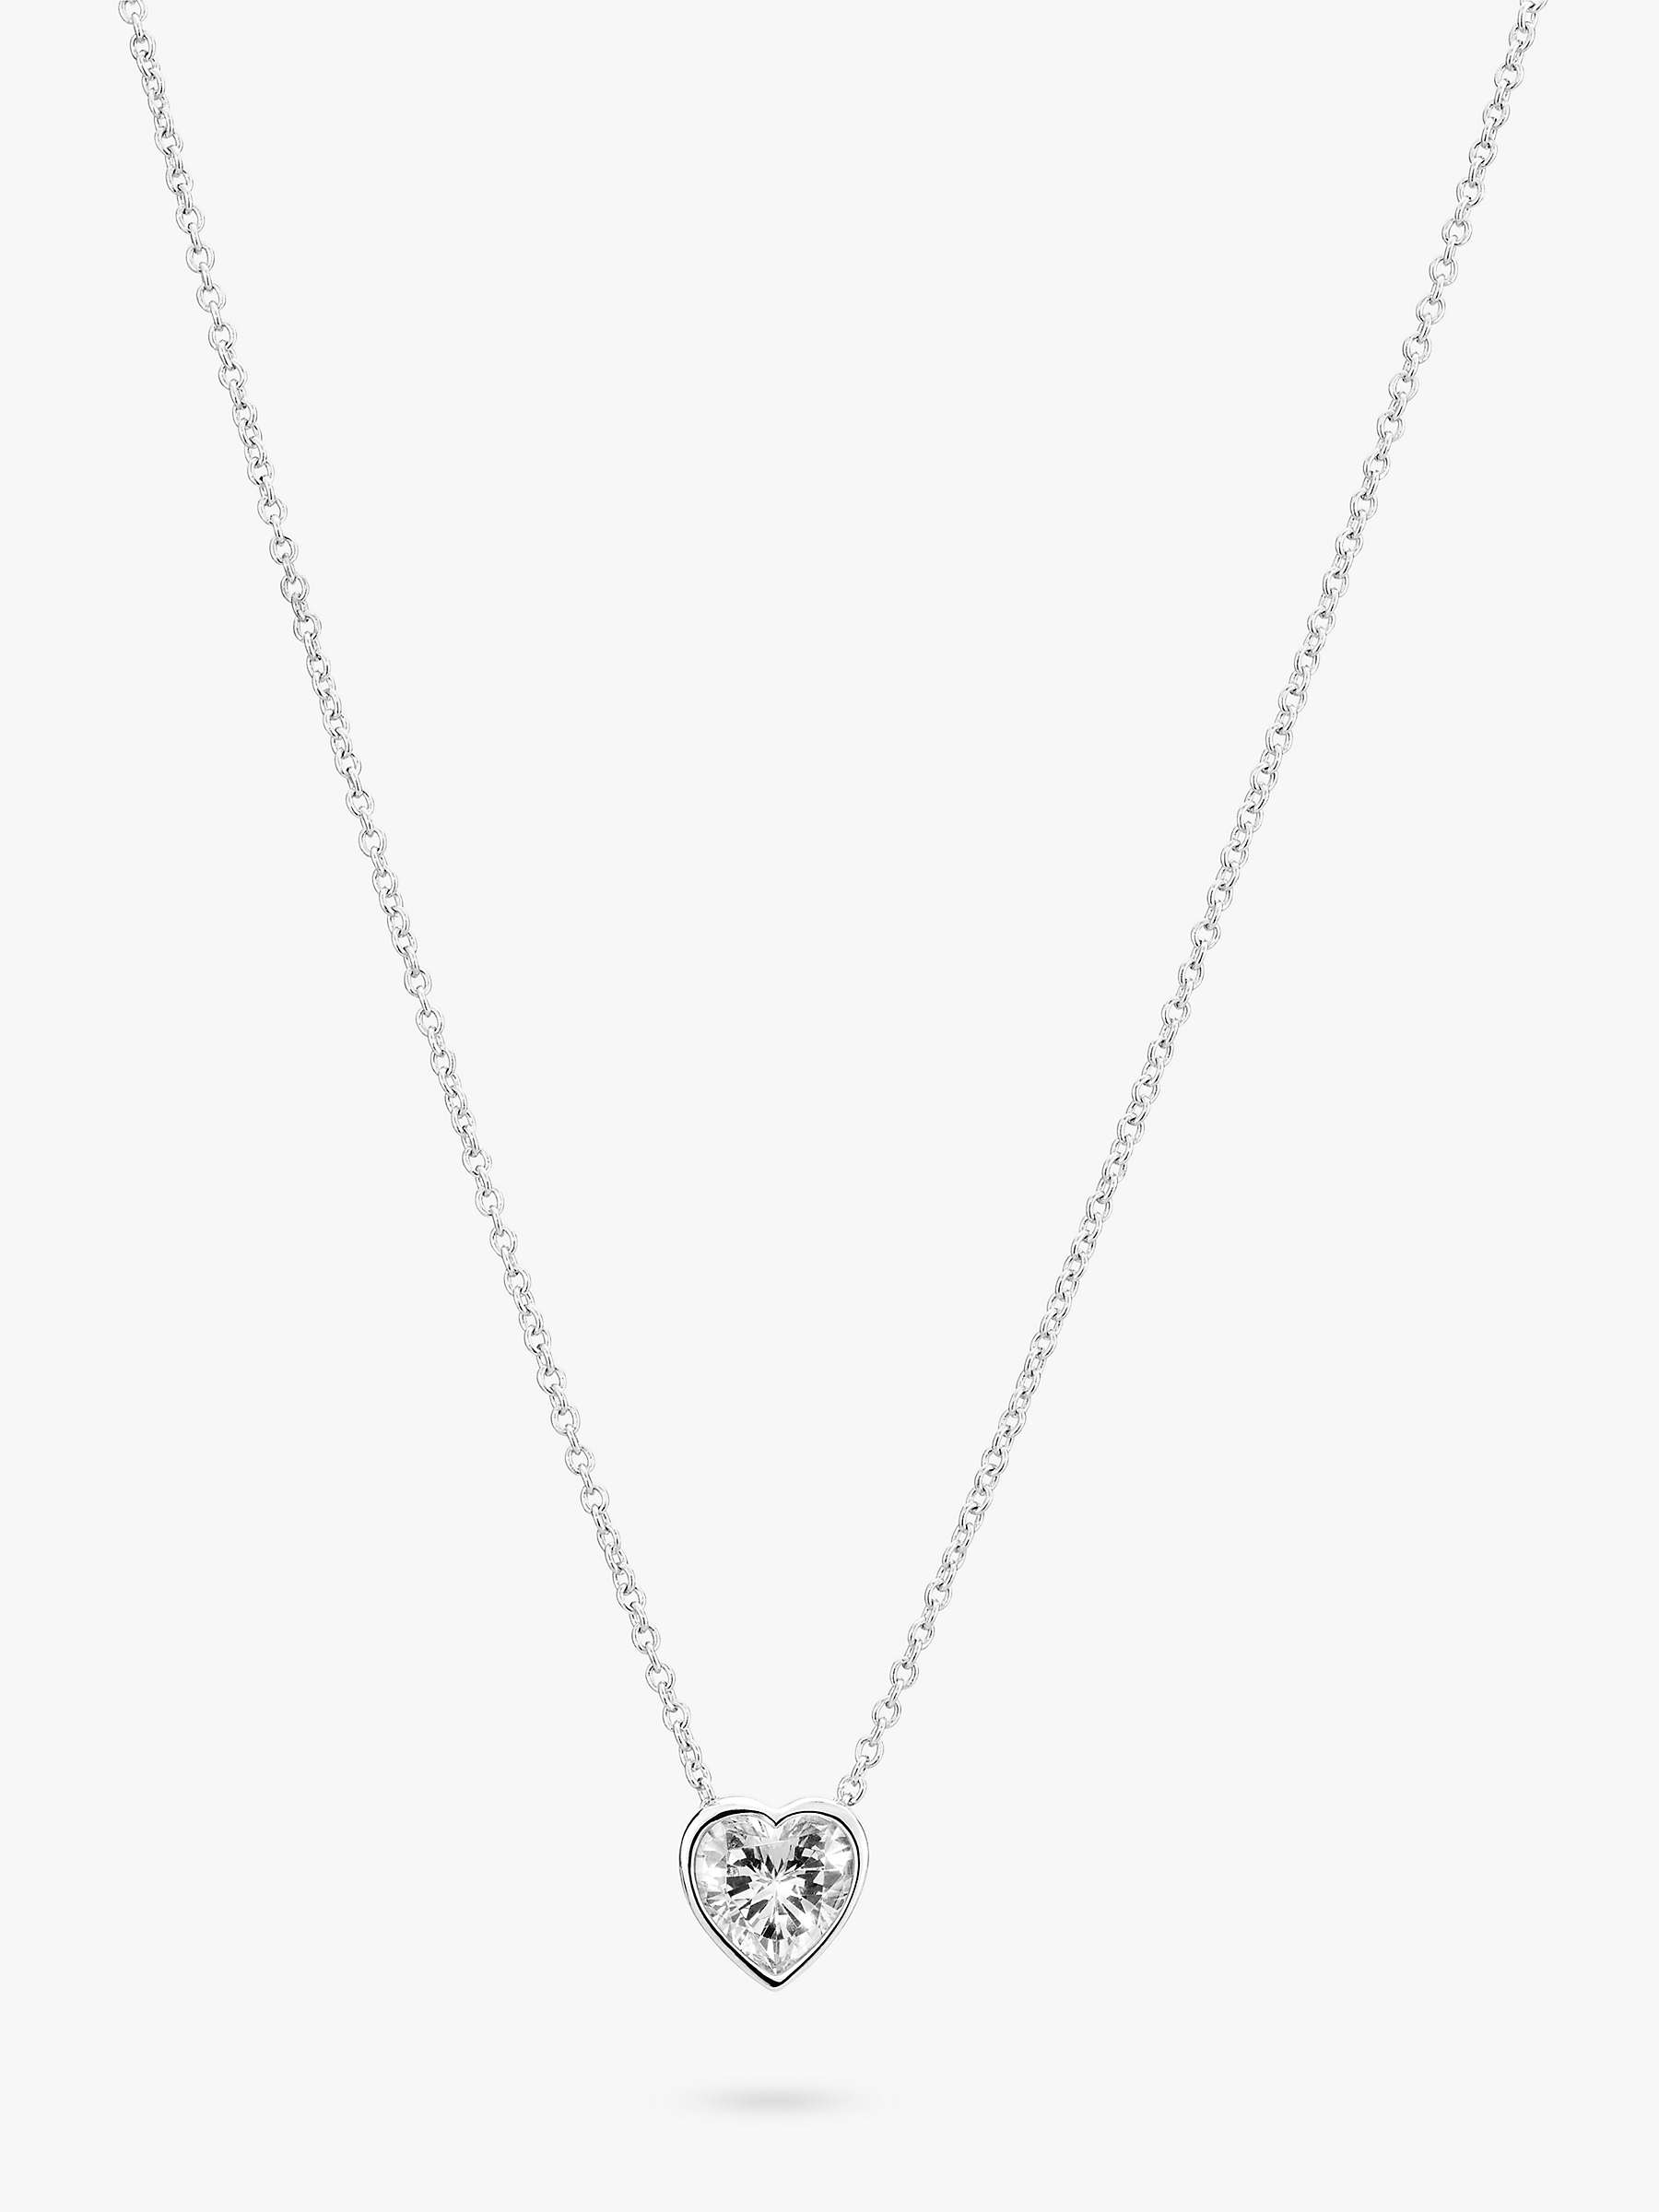 Buy Sif Jakobs Jewellery Amorino Cubic Zirconia Heart Necklace, Silver Online at johnlewis.com